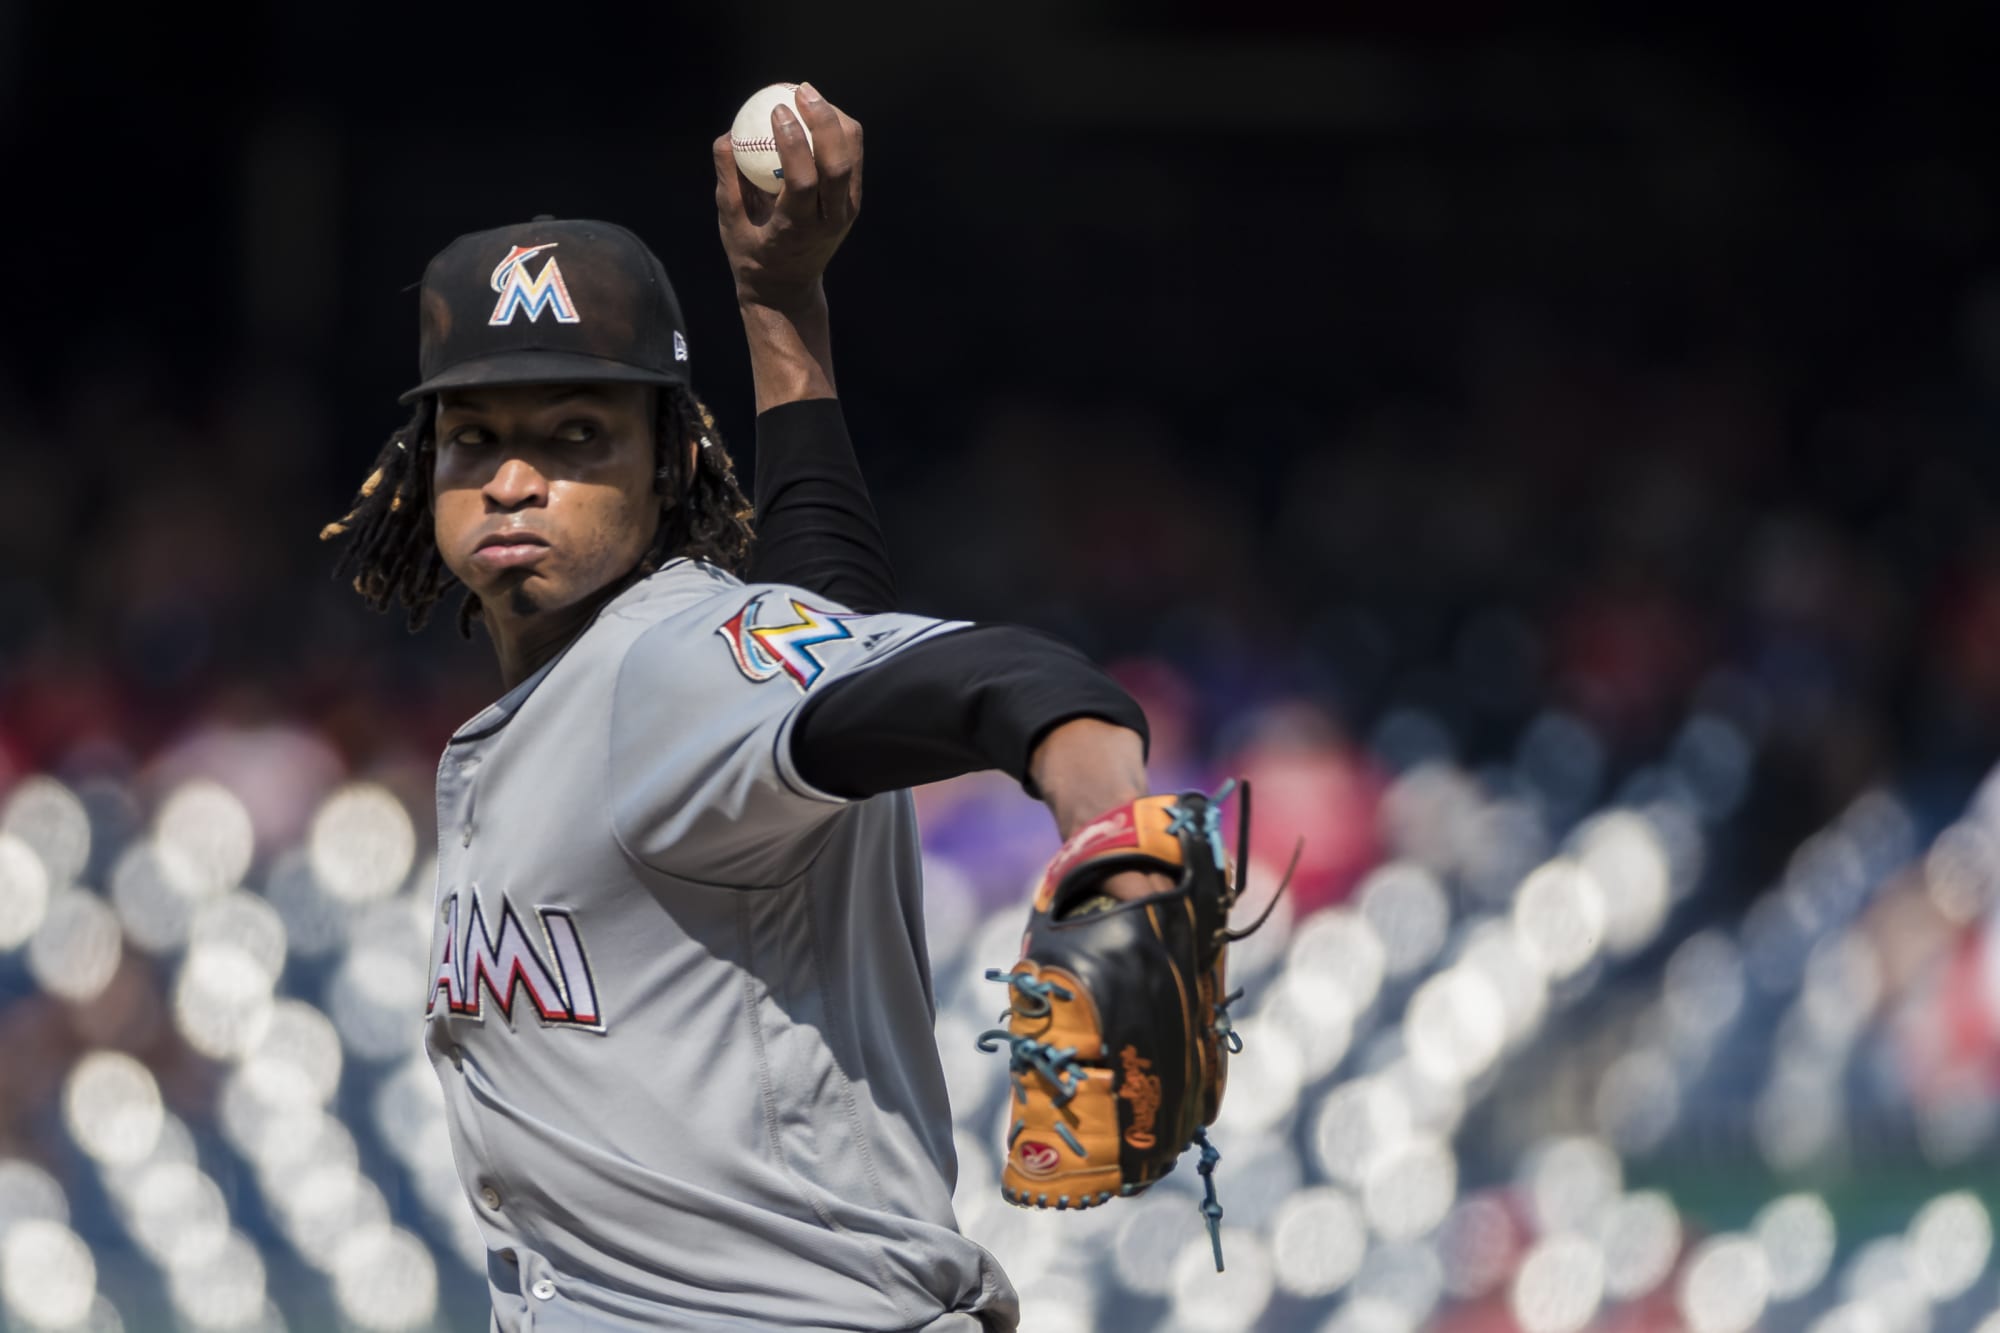 Marlins players who won’t be on the 2020 Opening Day roster